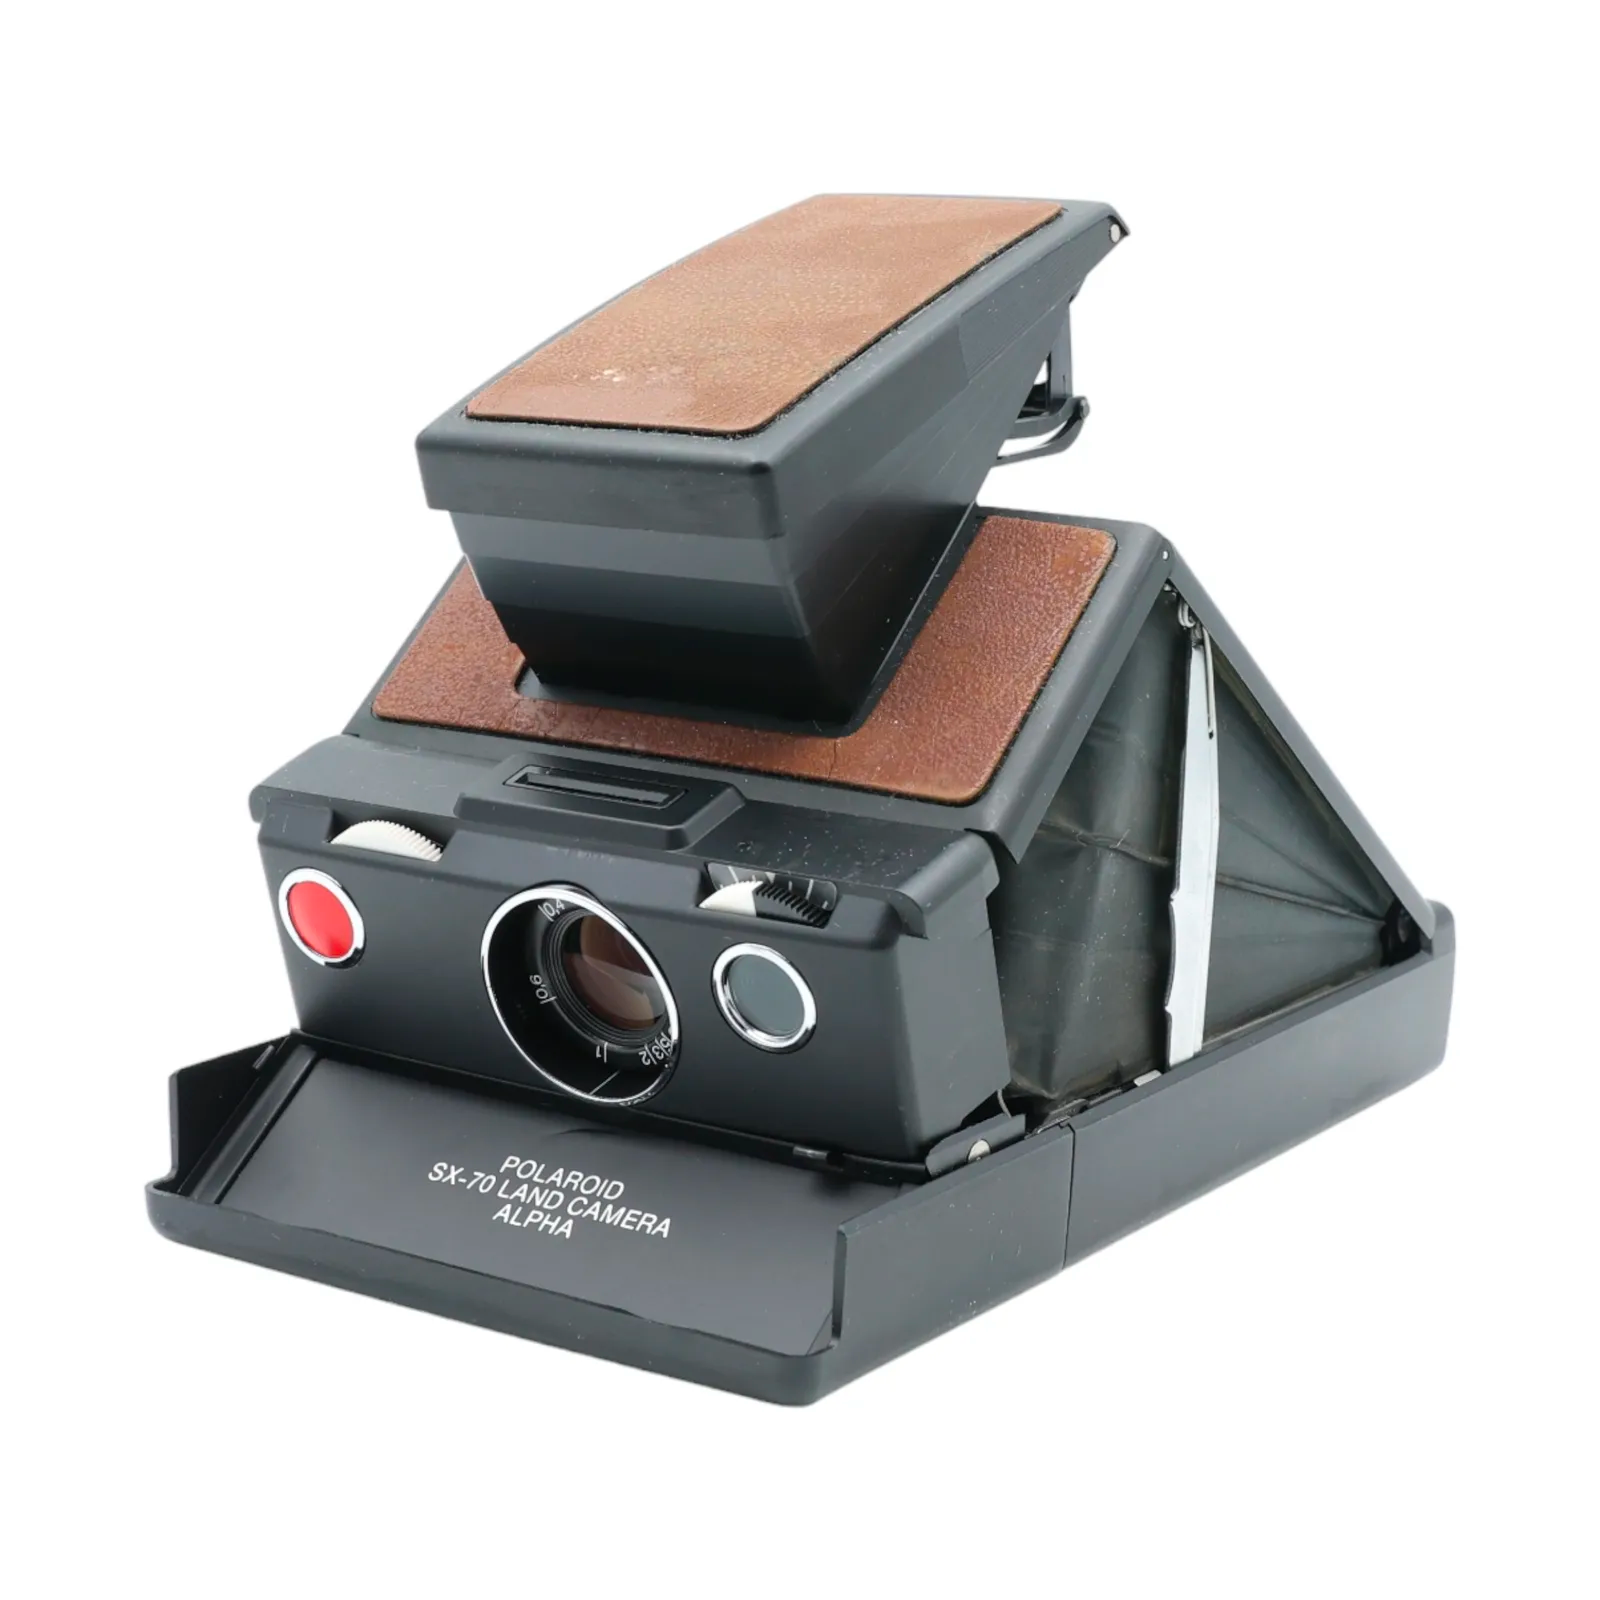 Polaroid SX-70 instant film camera, manufactured in the 70s, on a white plain backdrop